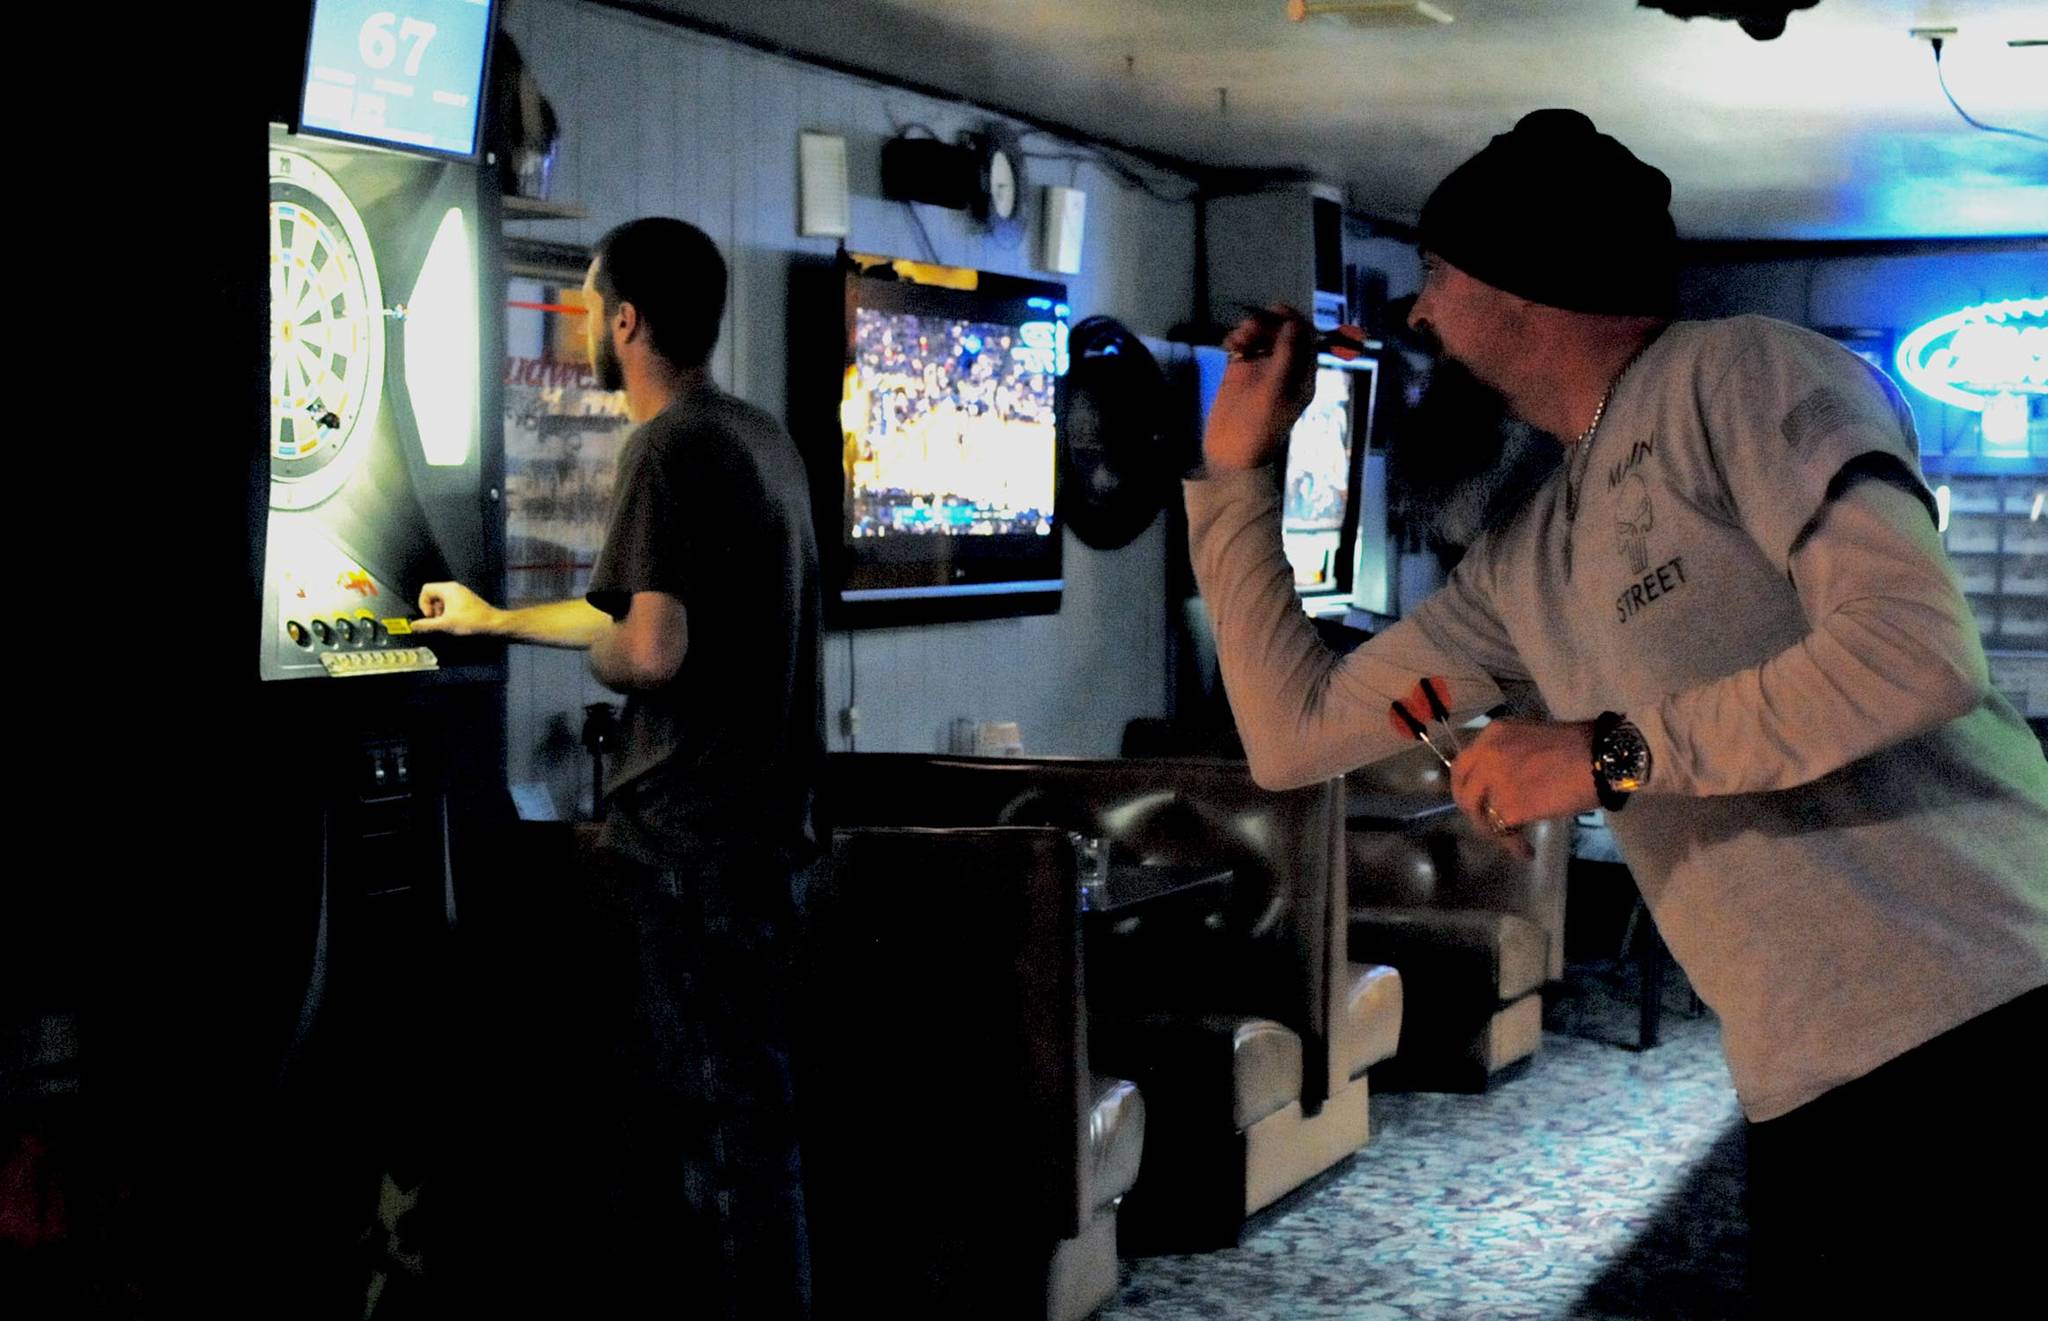 Travis Burnett (right) takes a shot with a dart at The Place Bar and Motel on Wednesday, Nov. 8, 2017 near Nikiski, Alaska. Burnett is part of a team that shoots darts at various bars around the central Kenai Peninsula, with his team headquartered at the Main Street Tap and Grill in Kenai. They rotate around other bars on an every-other-week basis. (Photo by Elizabeth Earl/Peninsula Clarion)